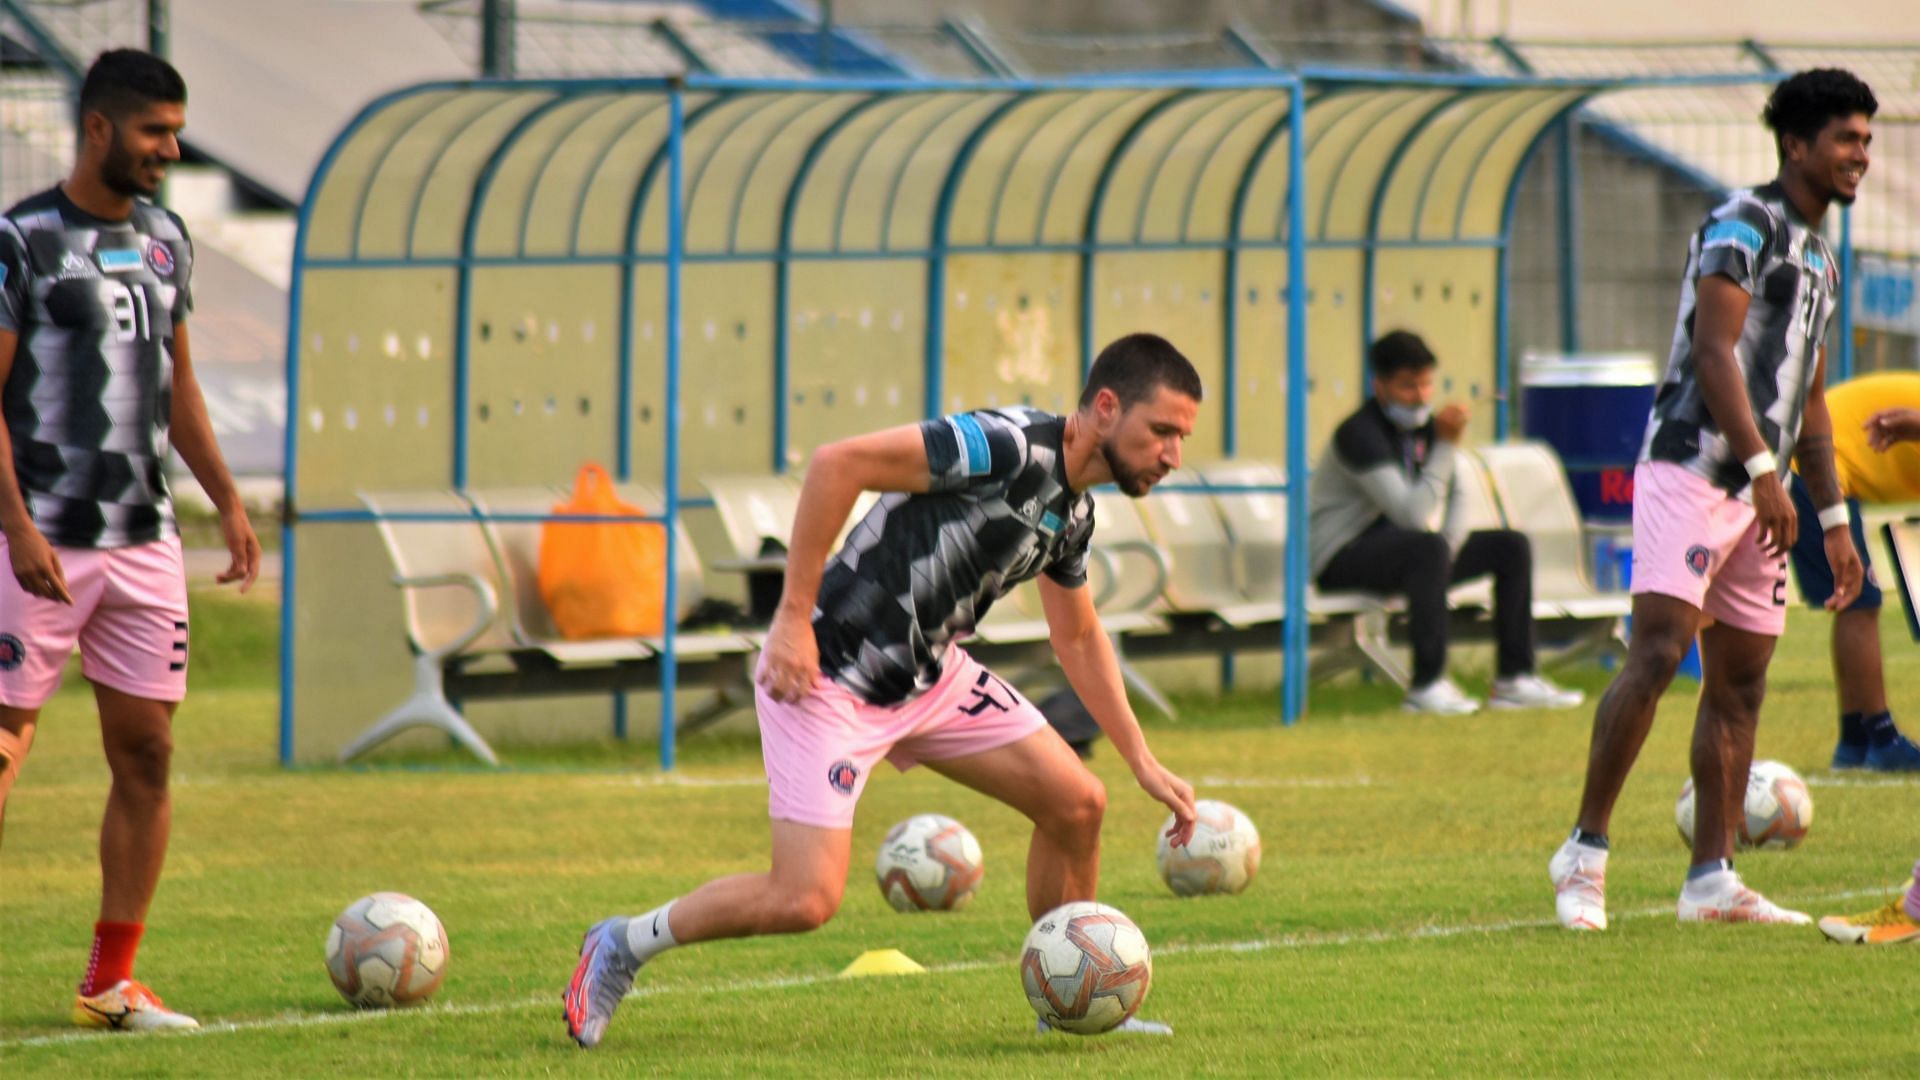 Rajasthan United FC players during a training session (Image credits: I-league Media)